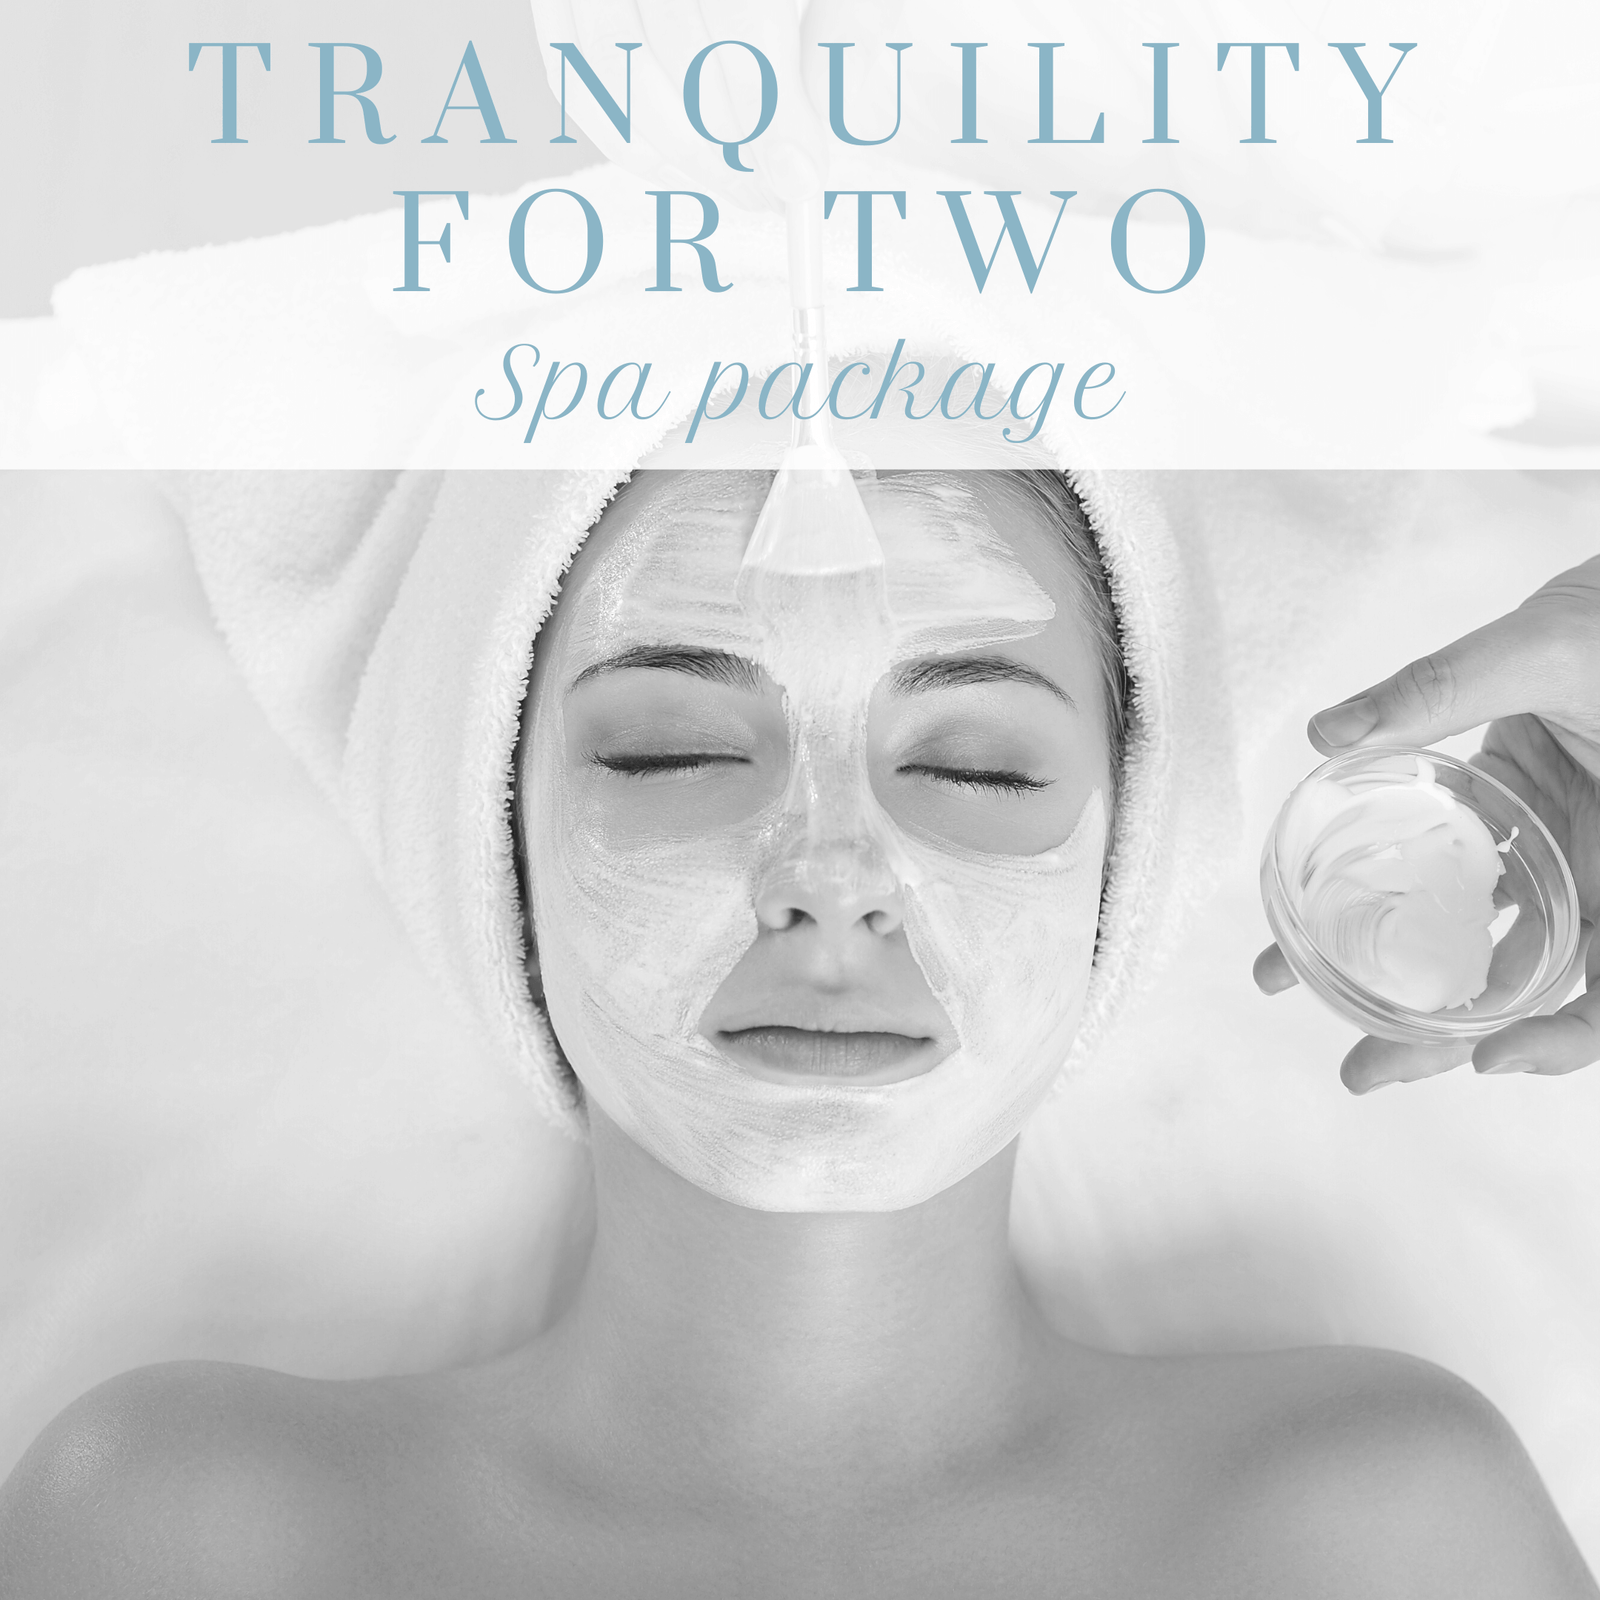 Tranquility for Two Spa Treatment Gift Package